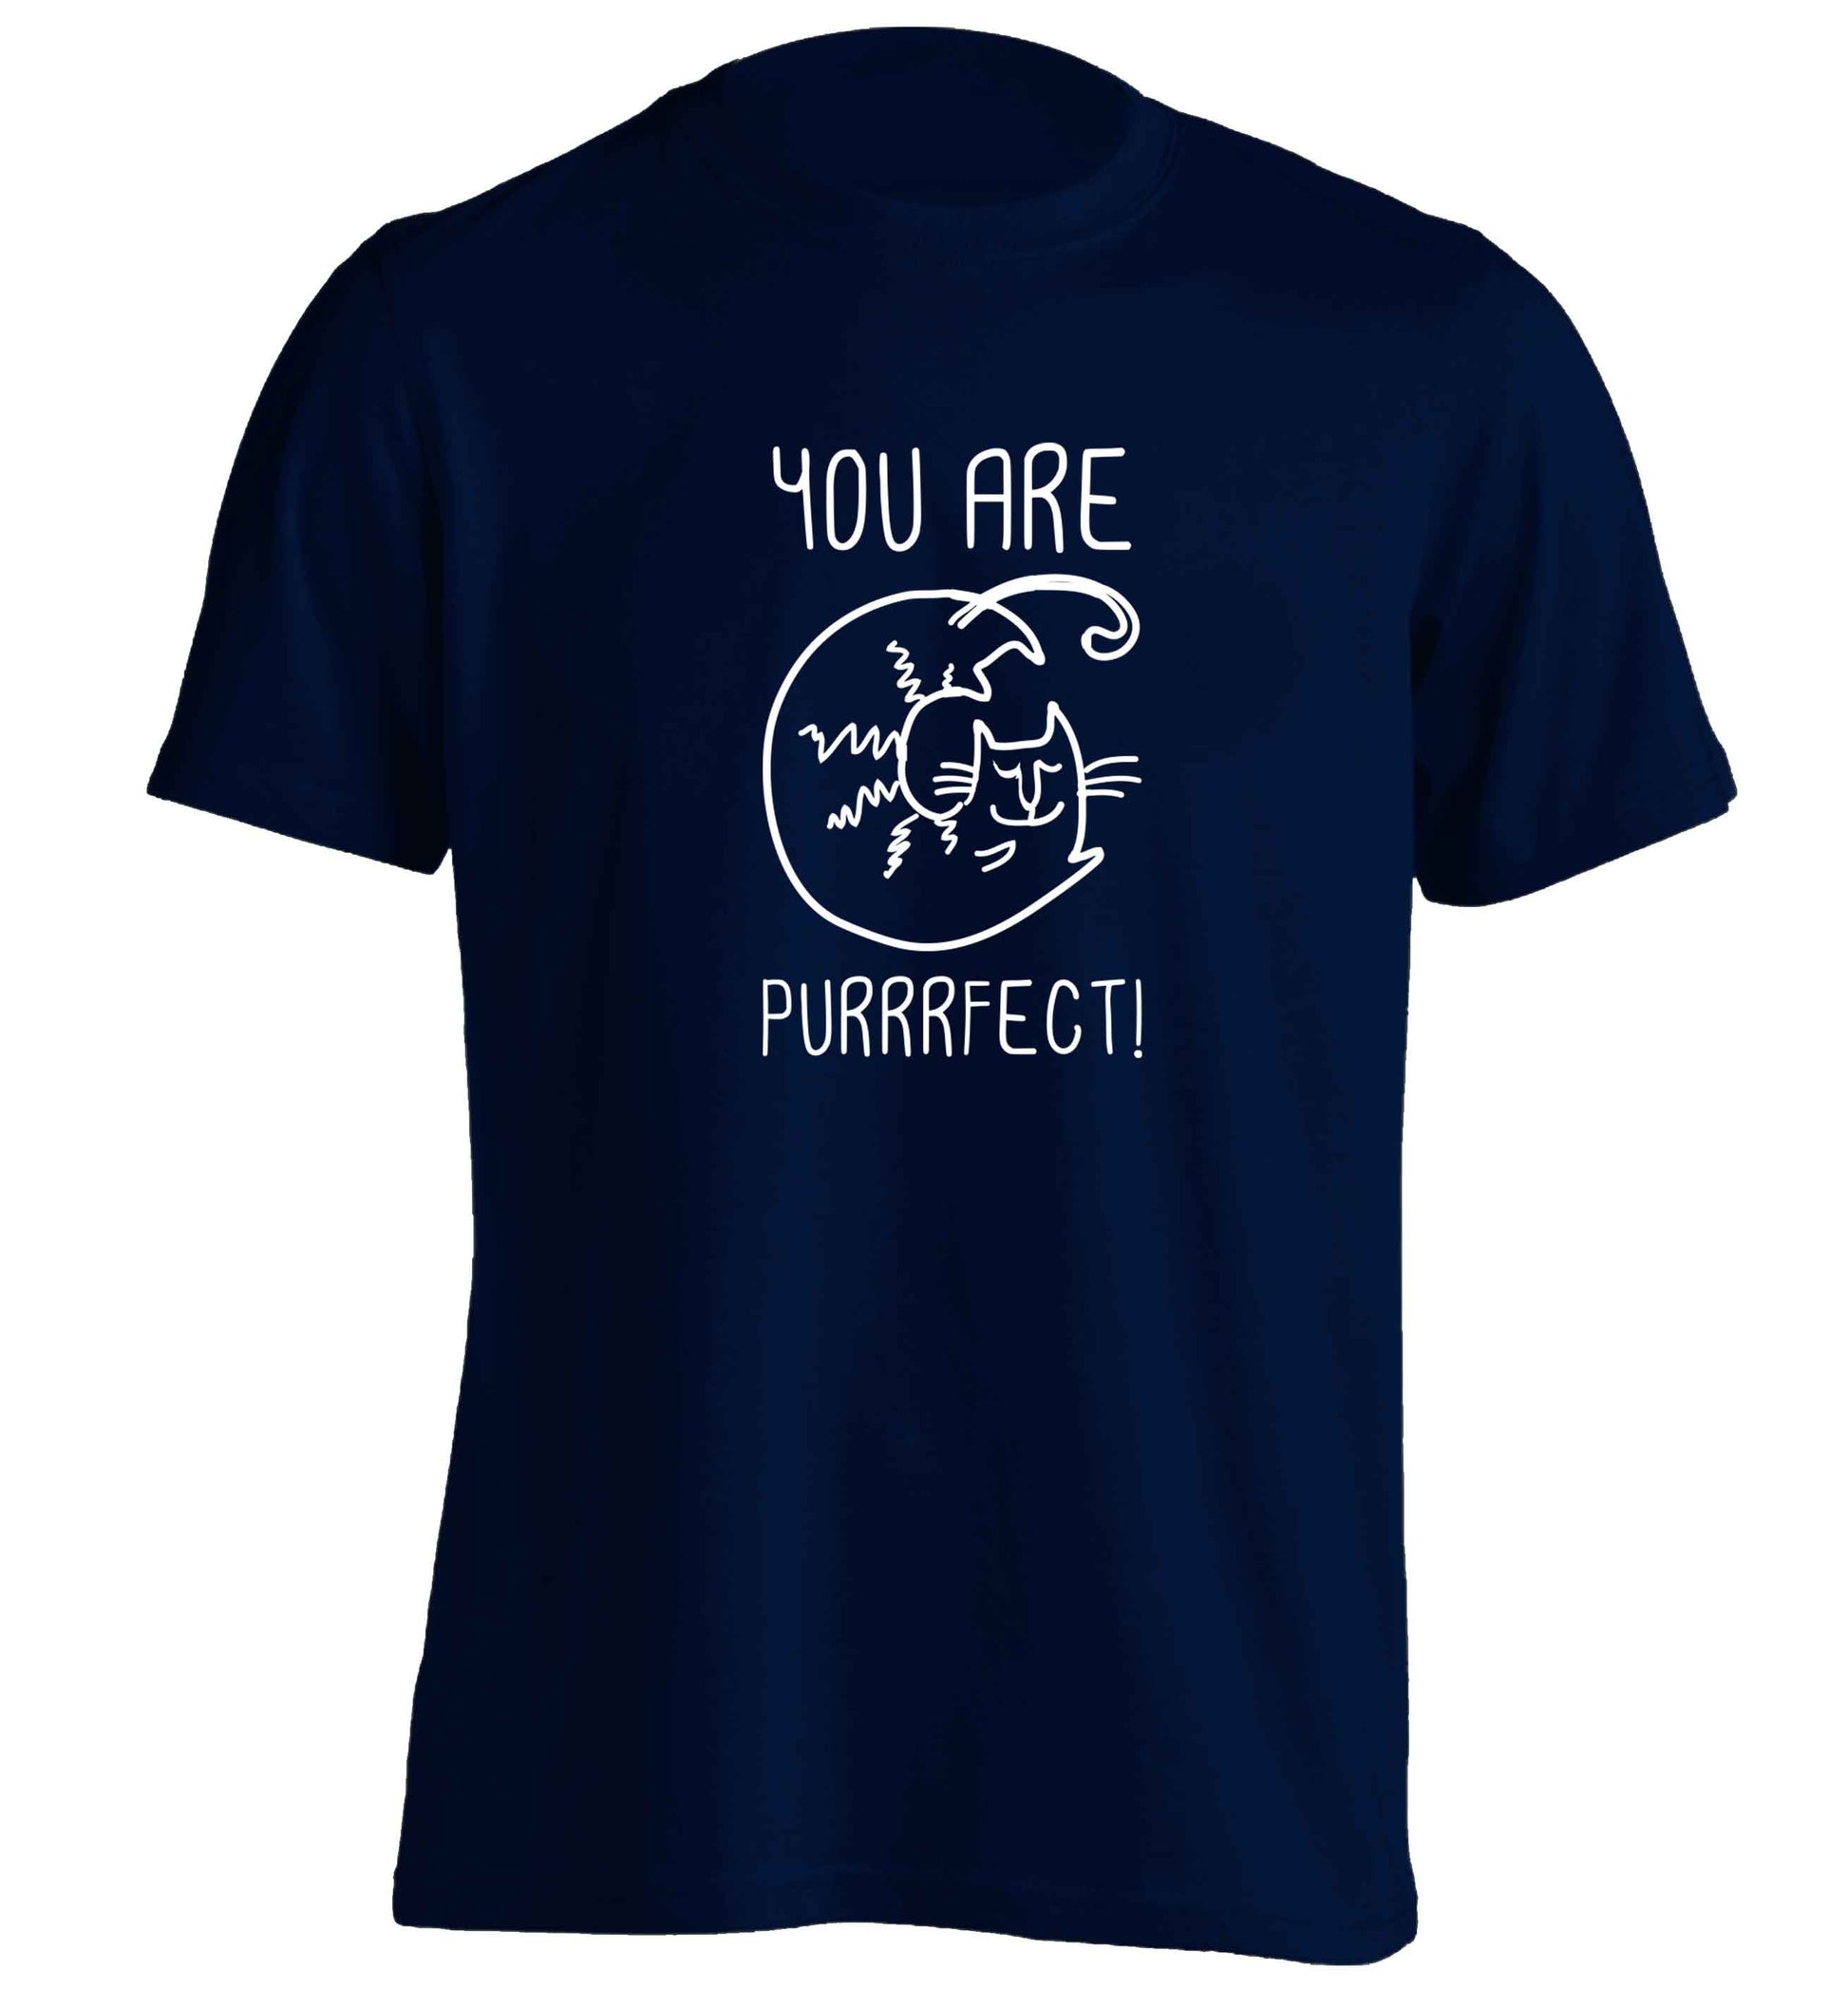 You are purrfect adults unisex navy Tshirt 2XL